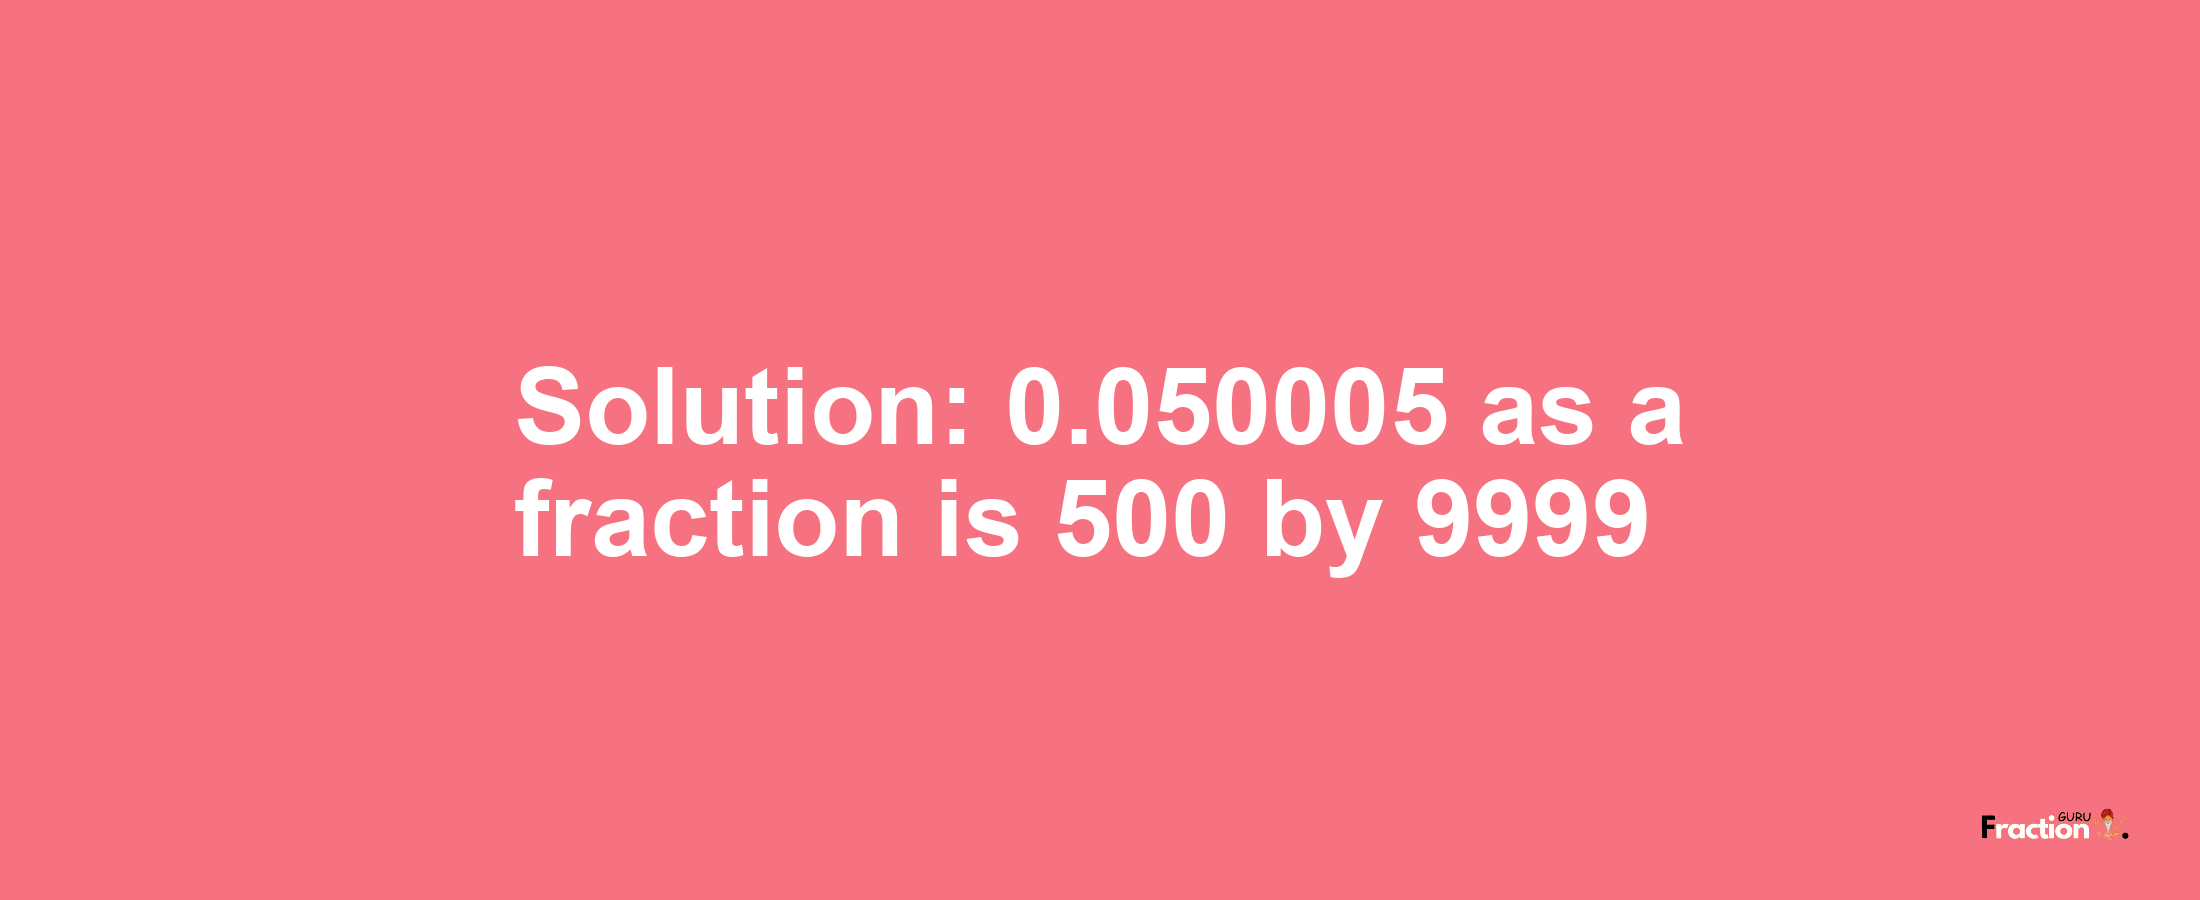 Solution:0.050005 as a fraction is 500/9999